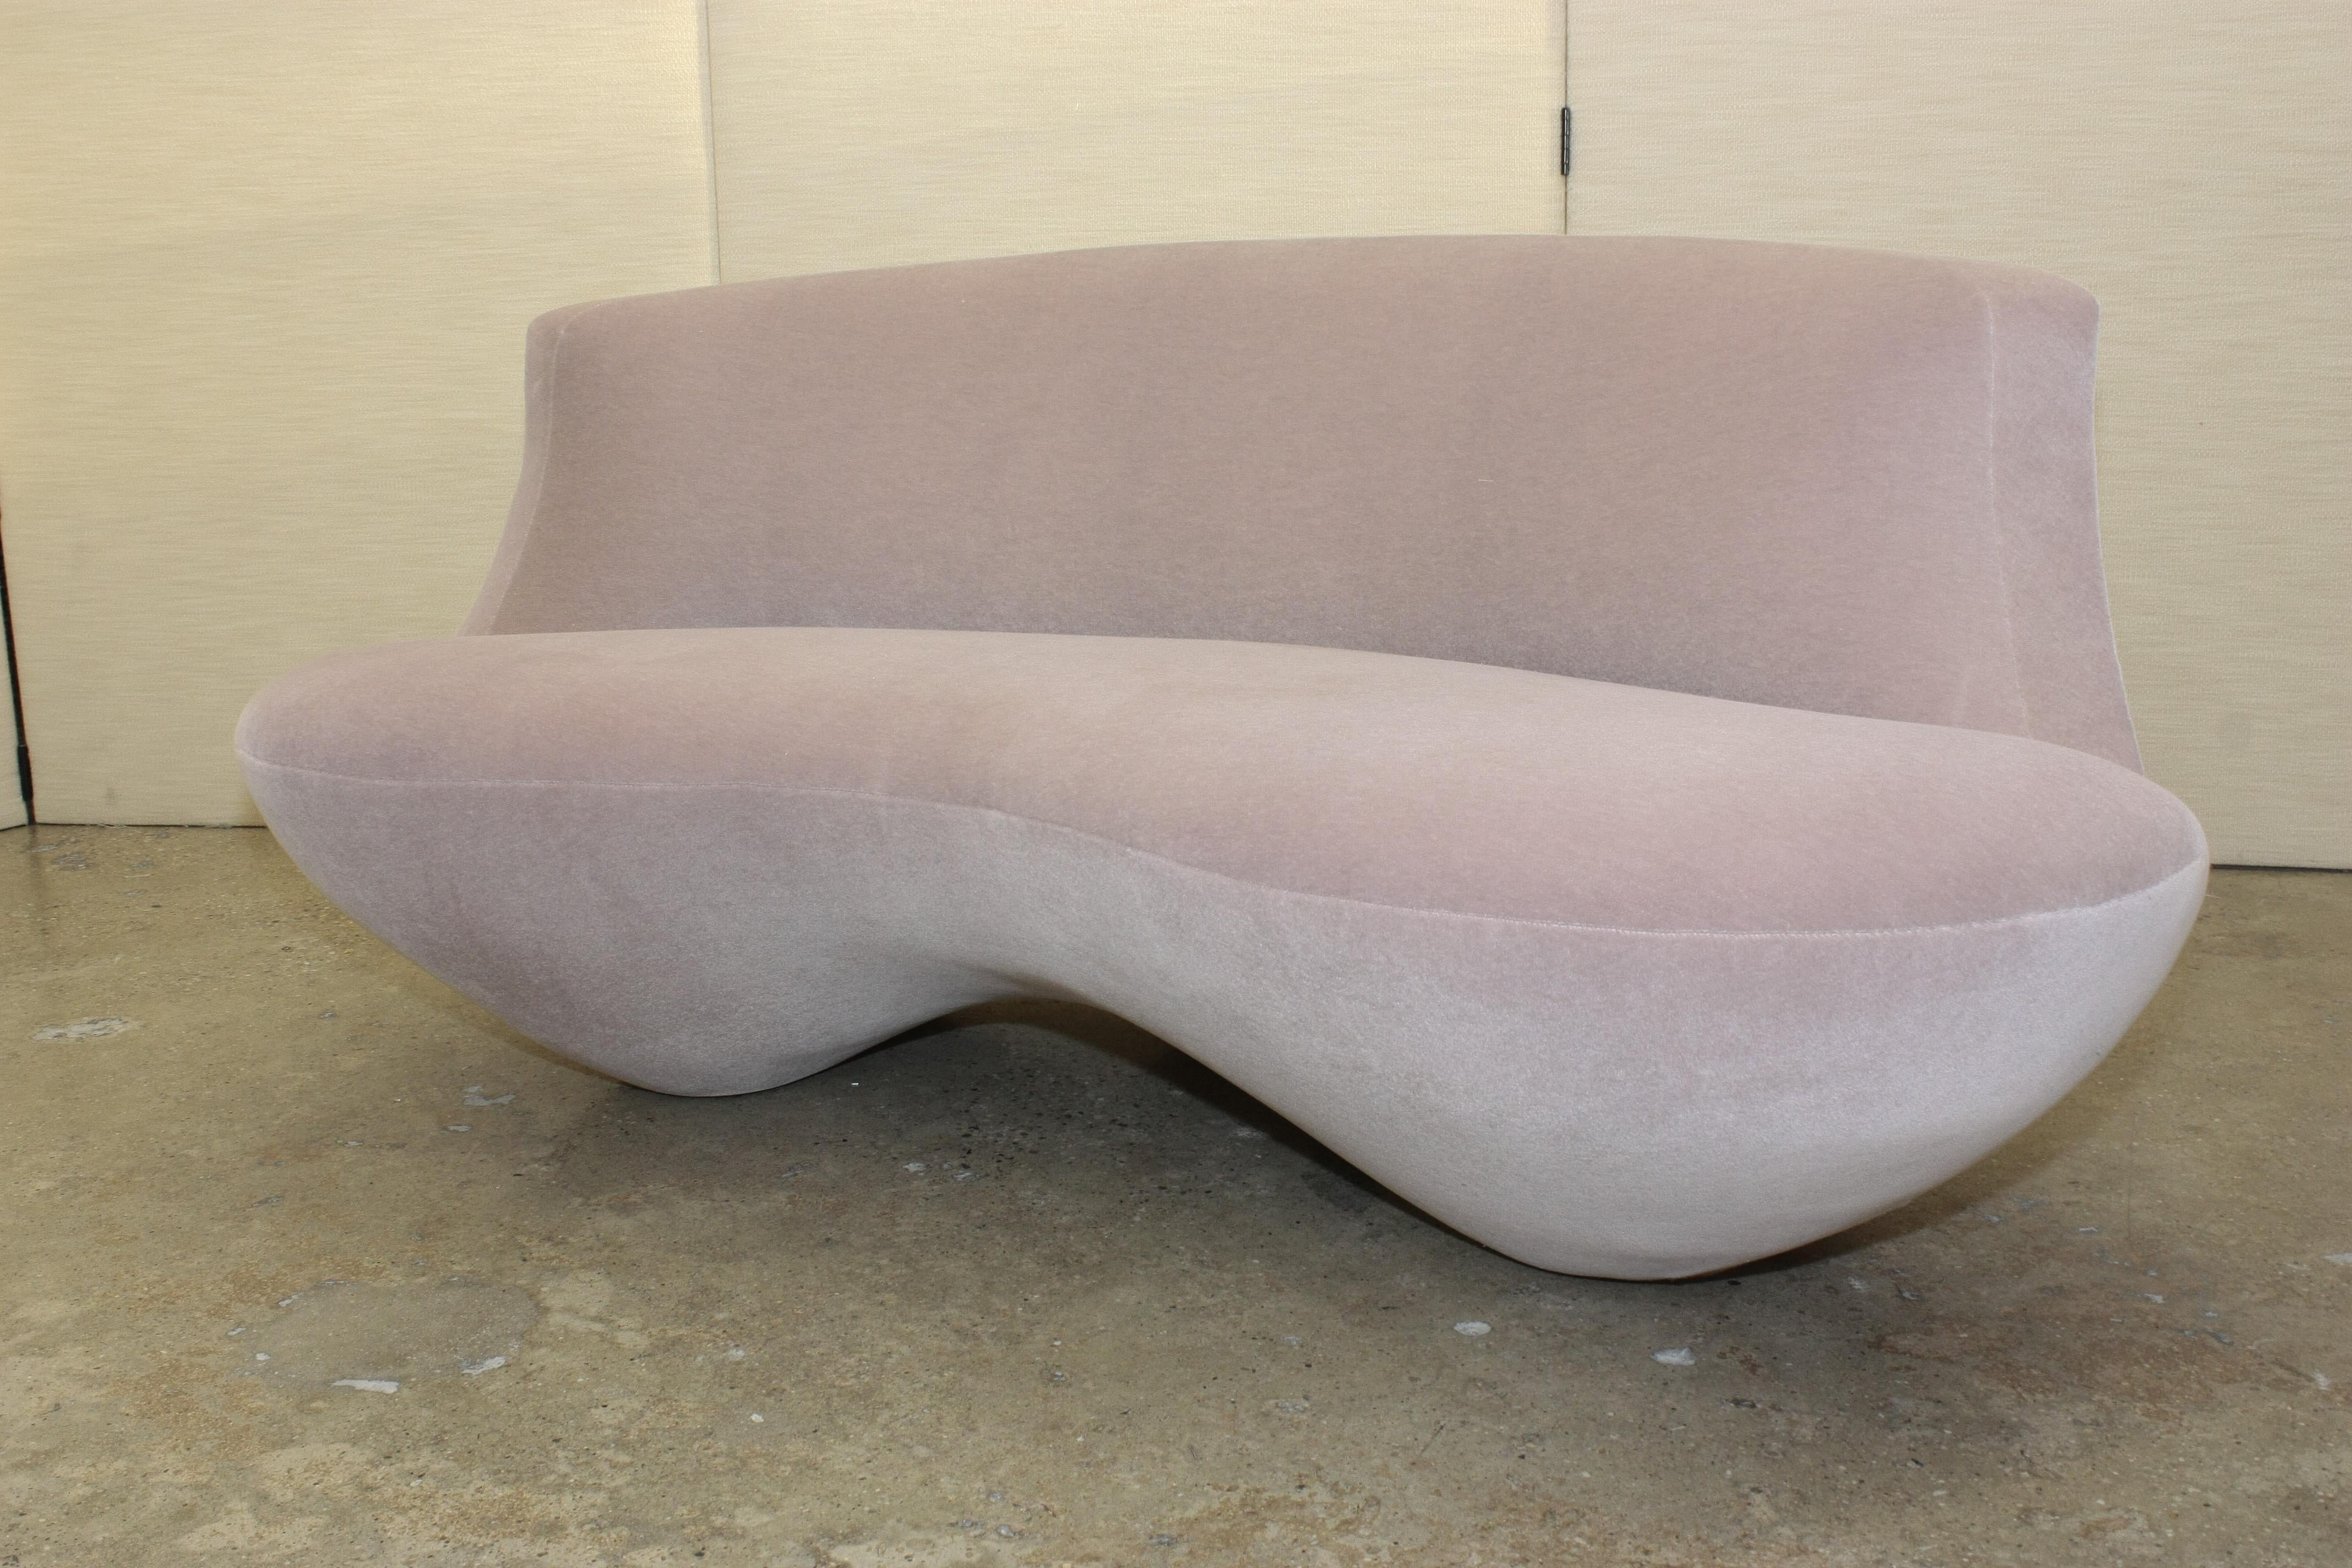 Appliqué Elune Sofa Designed by Joshua David Home and Manufactured by Jouffre For Sale